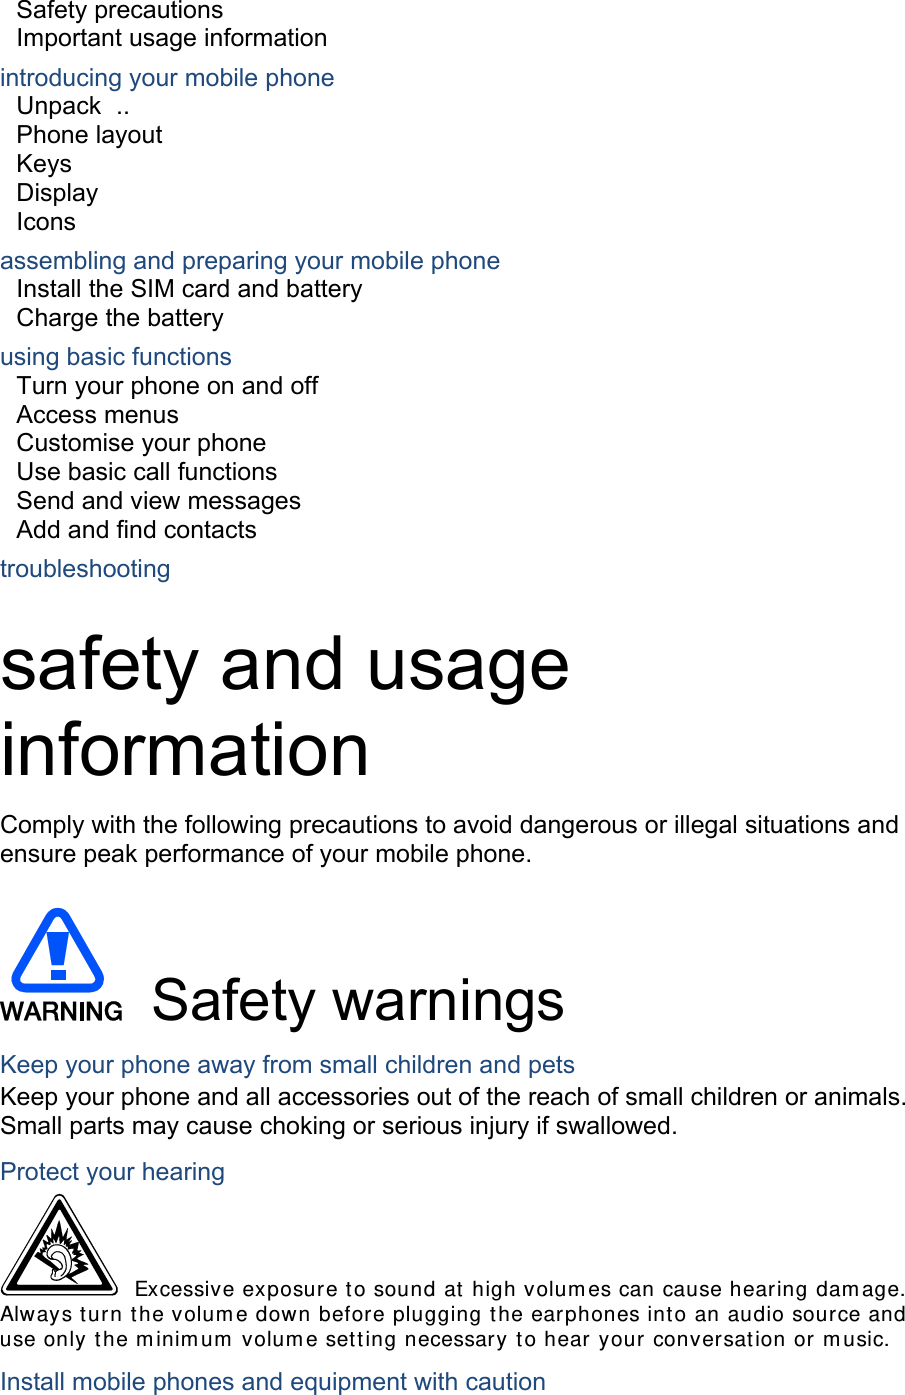 Safety precautions     Important usage information     introducing your mobile phone     Unpack  ..  Phone layout     Keys  Display  Icons assembling and preparing your mobile phone     Install the SIM card and battery     Charge the battery     using basic functions    Turn your phone on and off    Access menus     Customise your phone     Use basic call functions     Send and view messages     Add and find contacts     troubleshooting     safety and usage information  Comply with the following precautions to avoid dangerous or illegal situations and ensure peak performance of your mobile phone.   Safety warnings Keep your phone away from small children and pets Keep your phone and all accessories out of the reach of small children or animals. Small parts may cause choking or serious injury if swallowed. Protect your hearing  Excessive exposure to sound at high volumes can cause hearing damage. Always turn the volume down before plugging the earphones into an audio source and use only the minimum volume setting necessary to hear your conversation or music. Install mobile phones and equipment with caution 